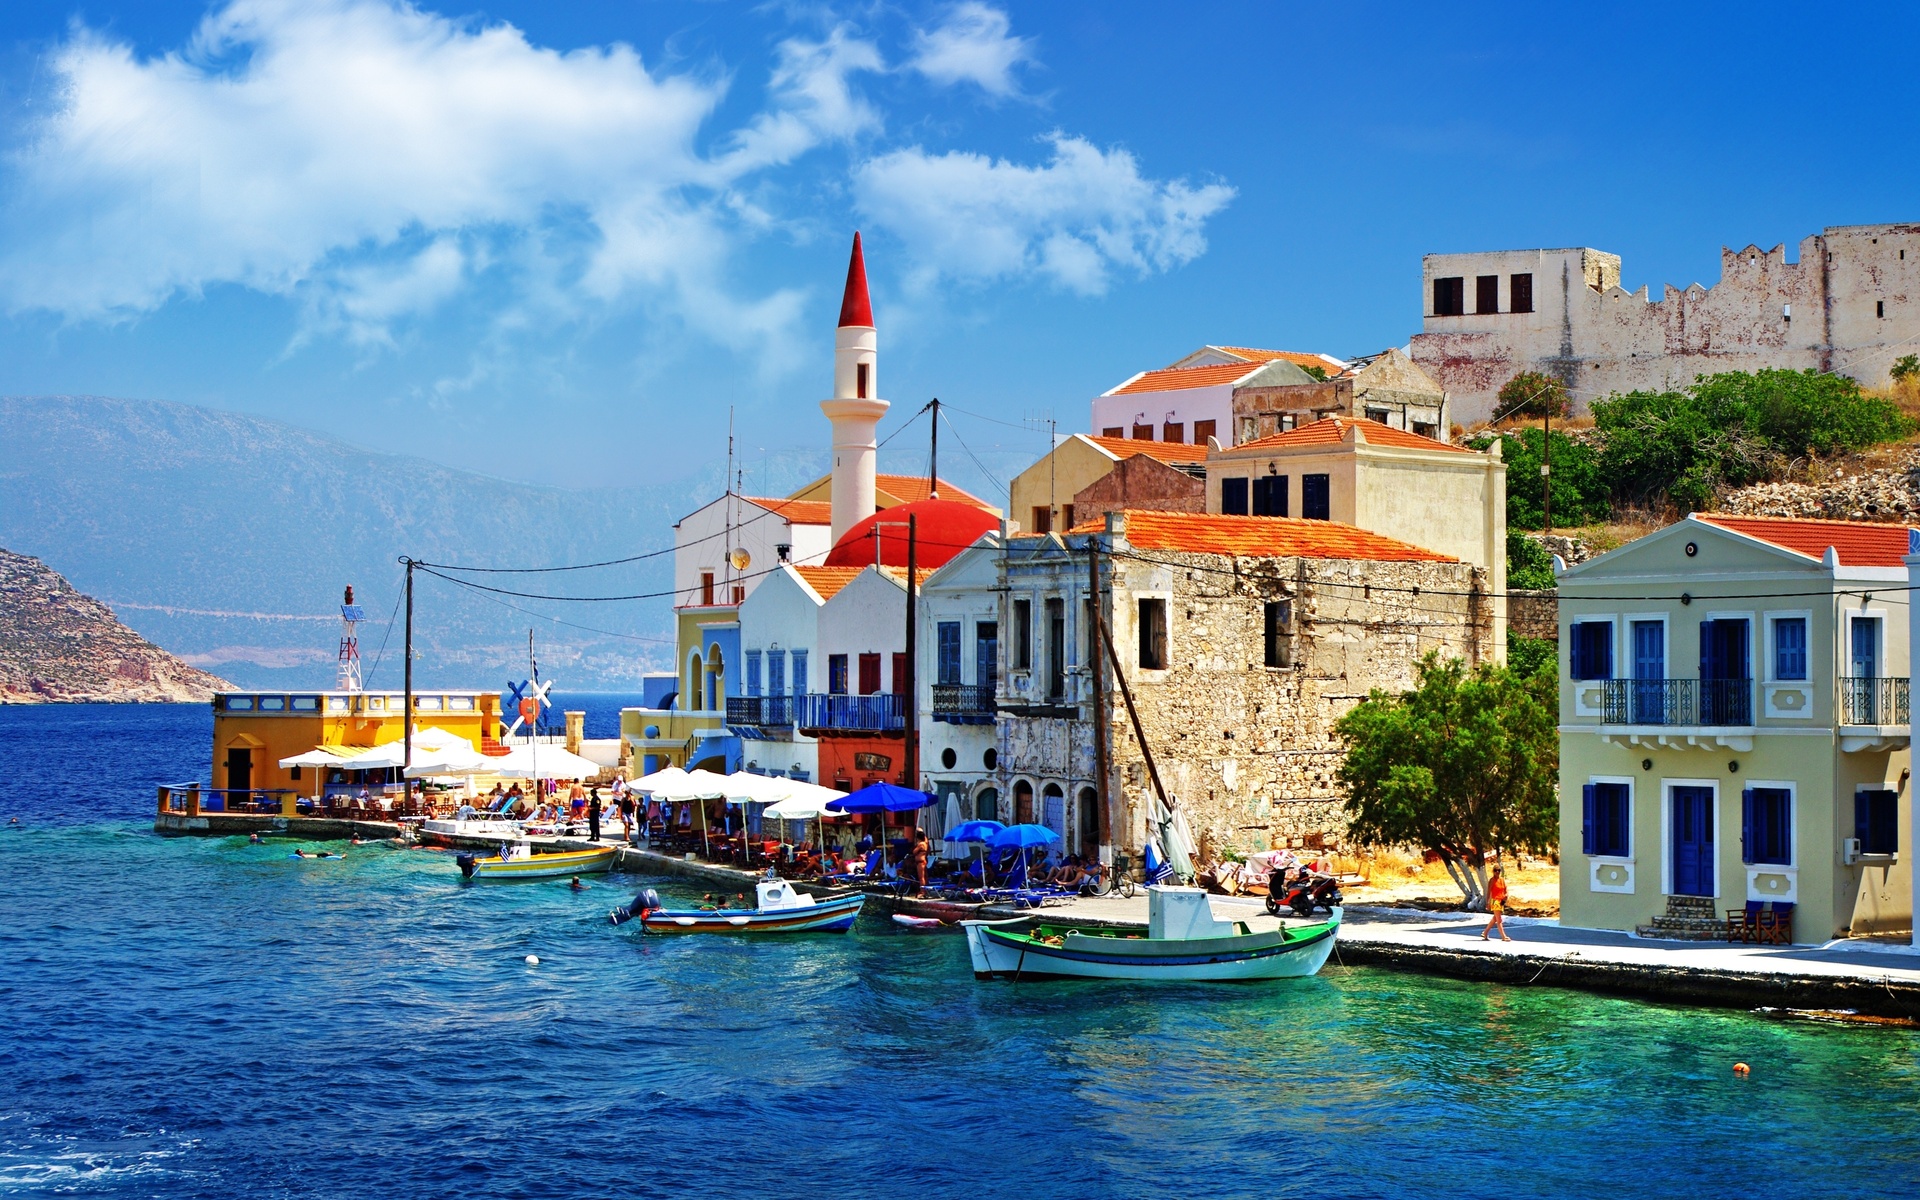 greece, Architecture, Buildings, Houses, Islands, Boats, Church, Sky, Clouds, Town Wallpaper